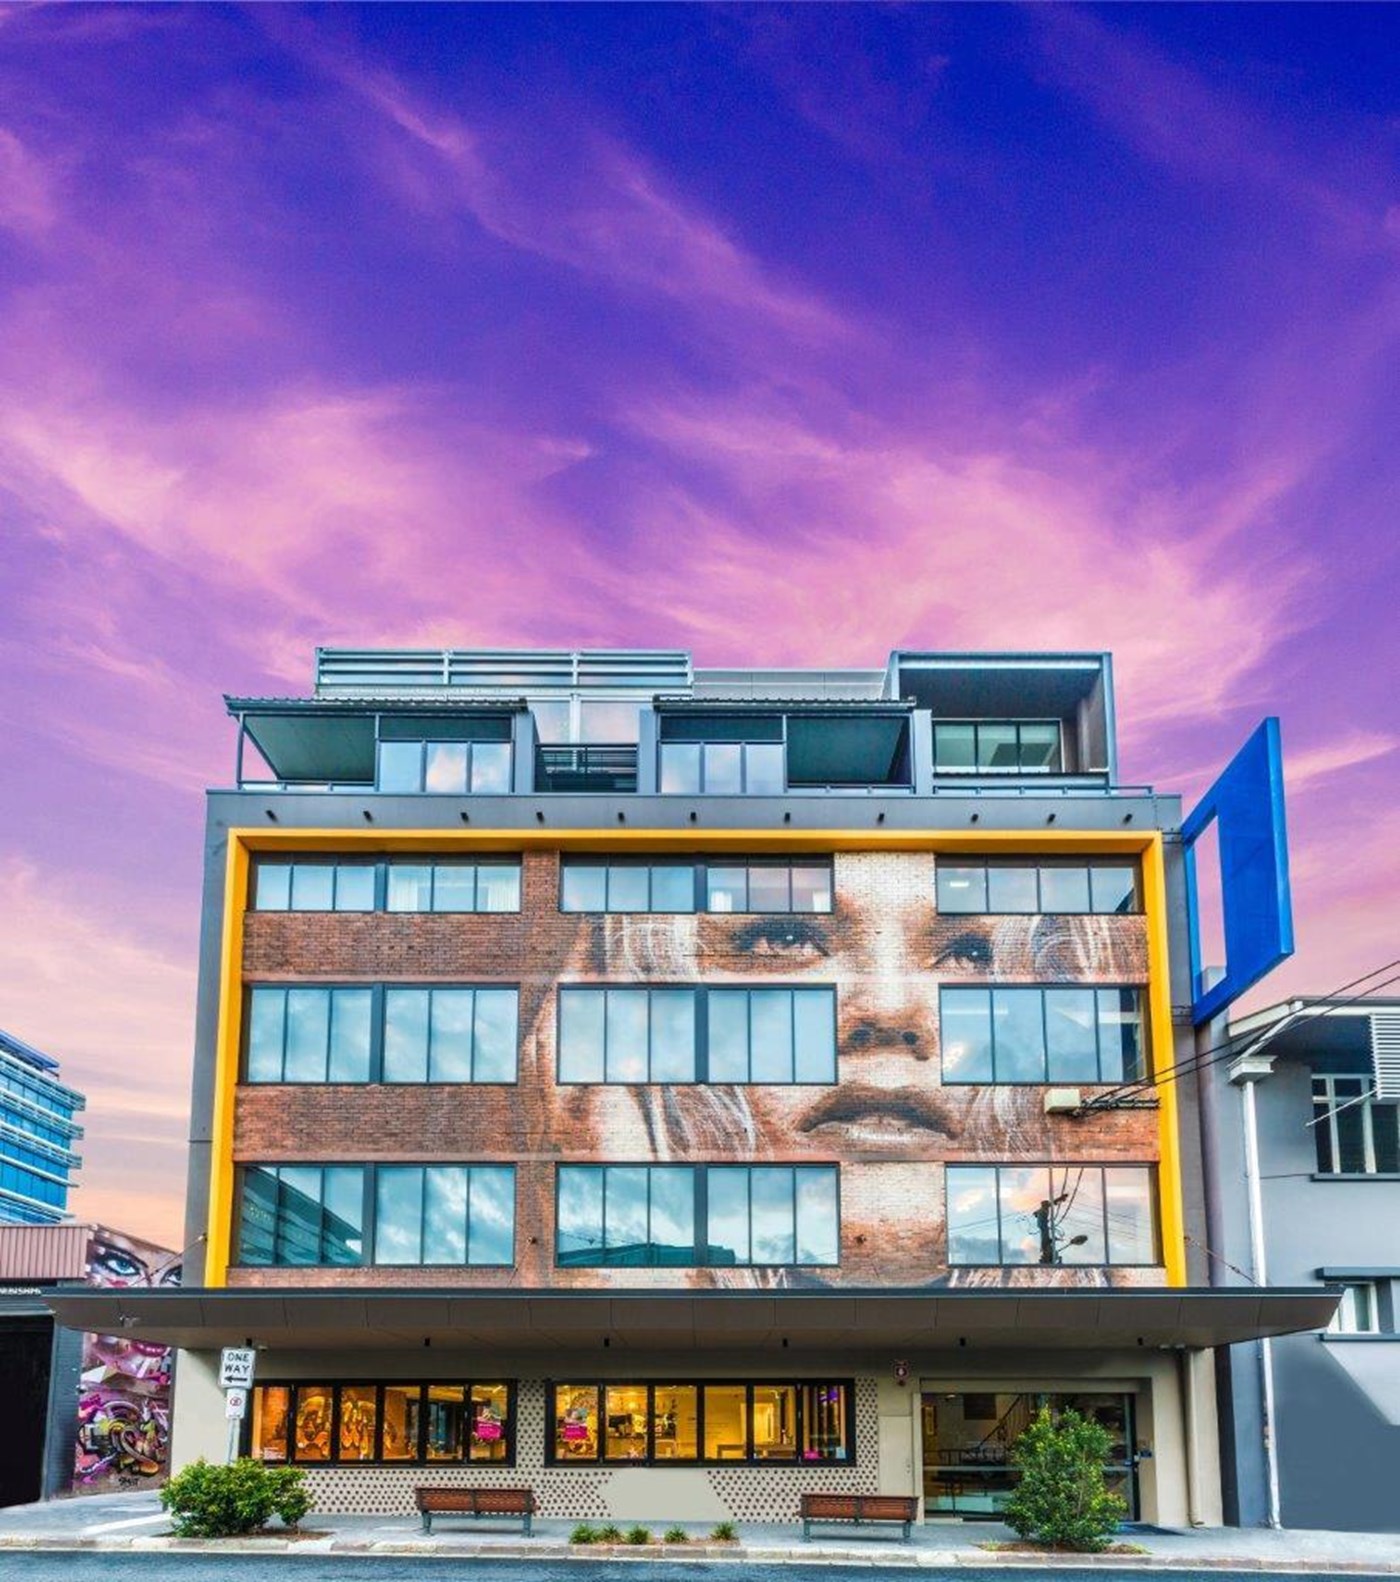 Exterior of a brick hotel with a mural of a face painted over it